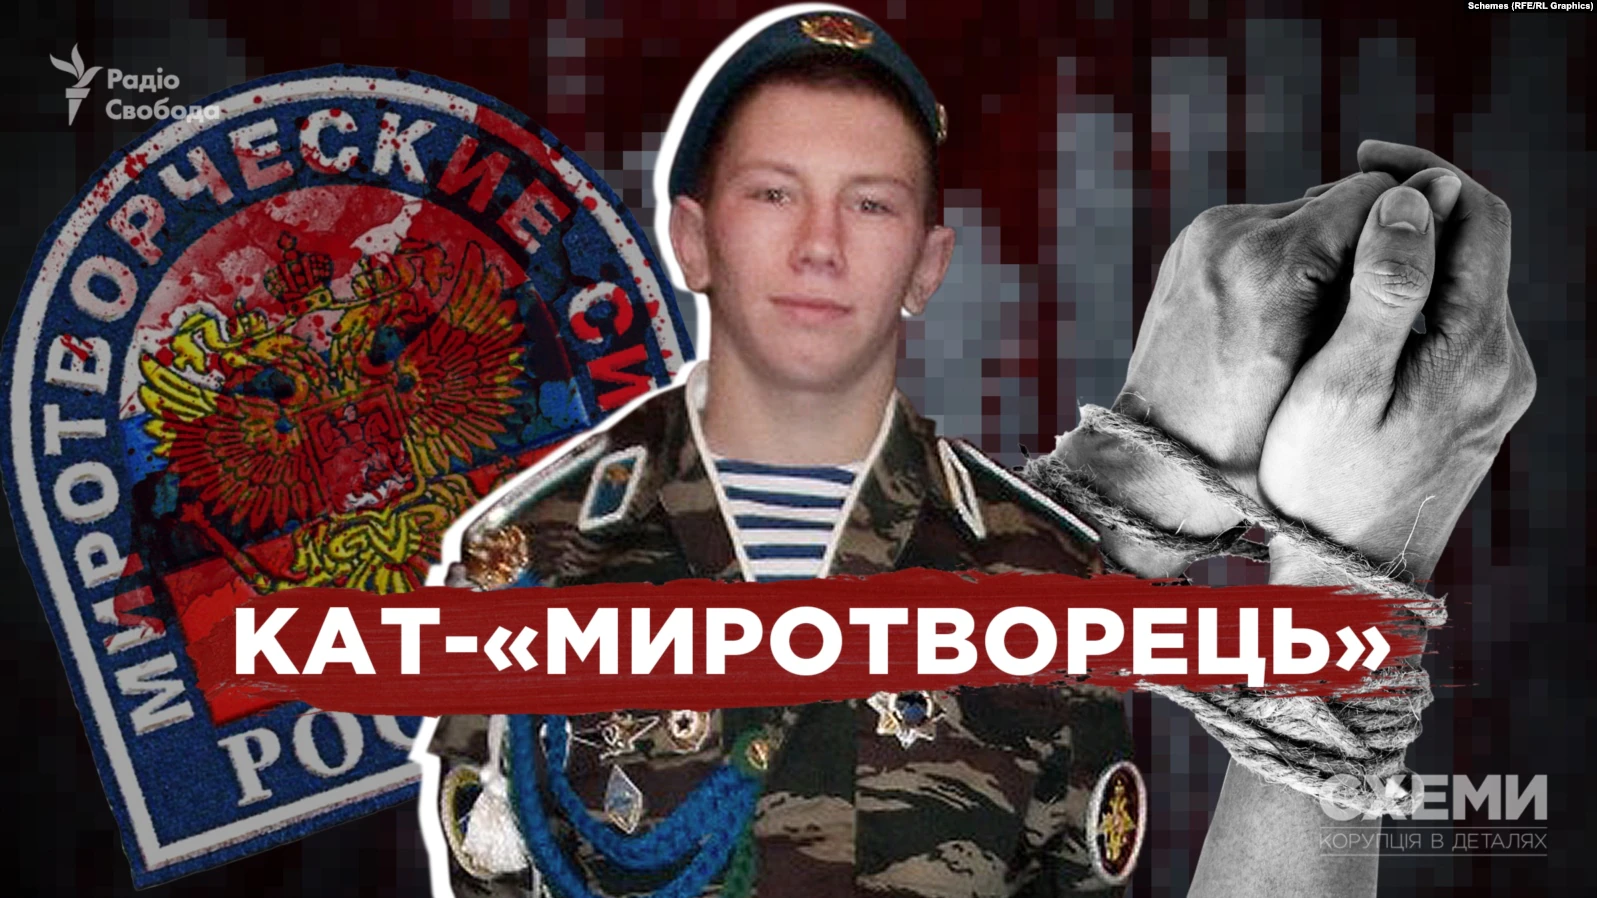 "Butcher-Peacemaker": "Schemes" helped identify troops from Russia who mocked the peasants